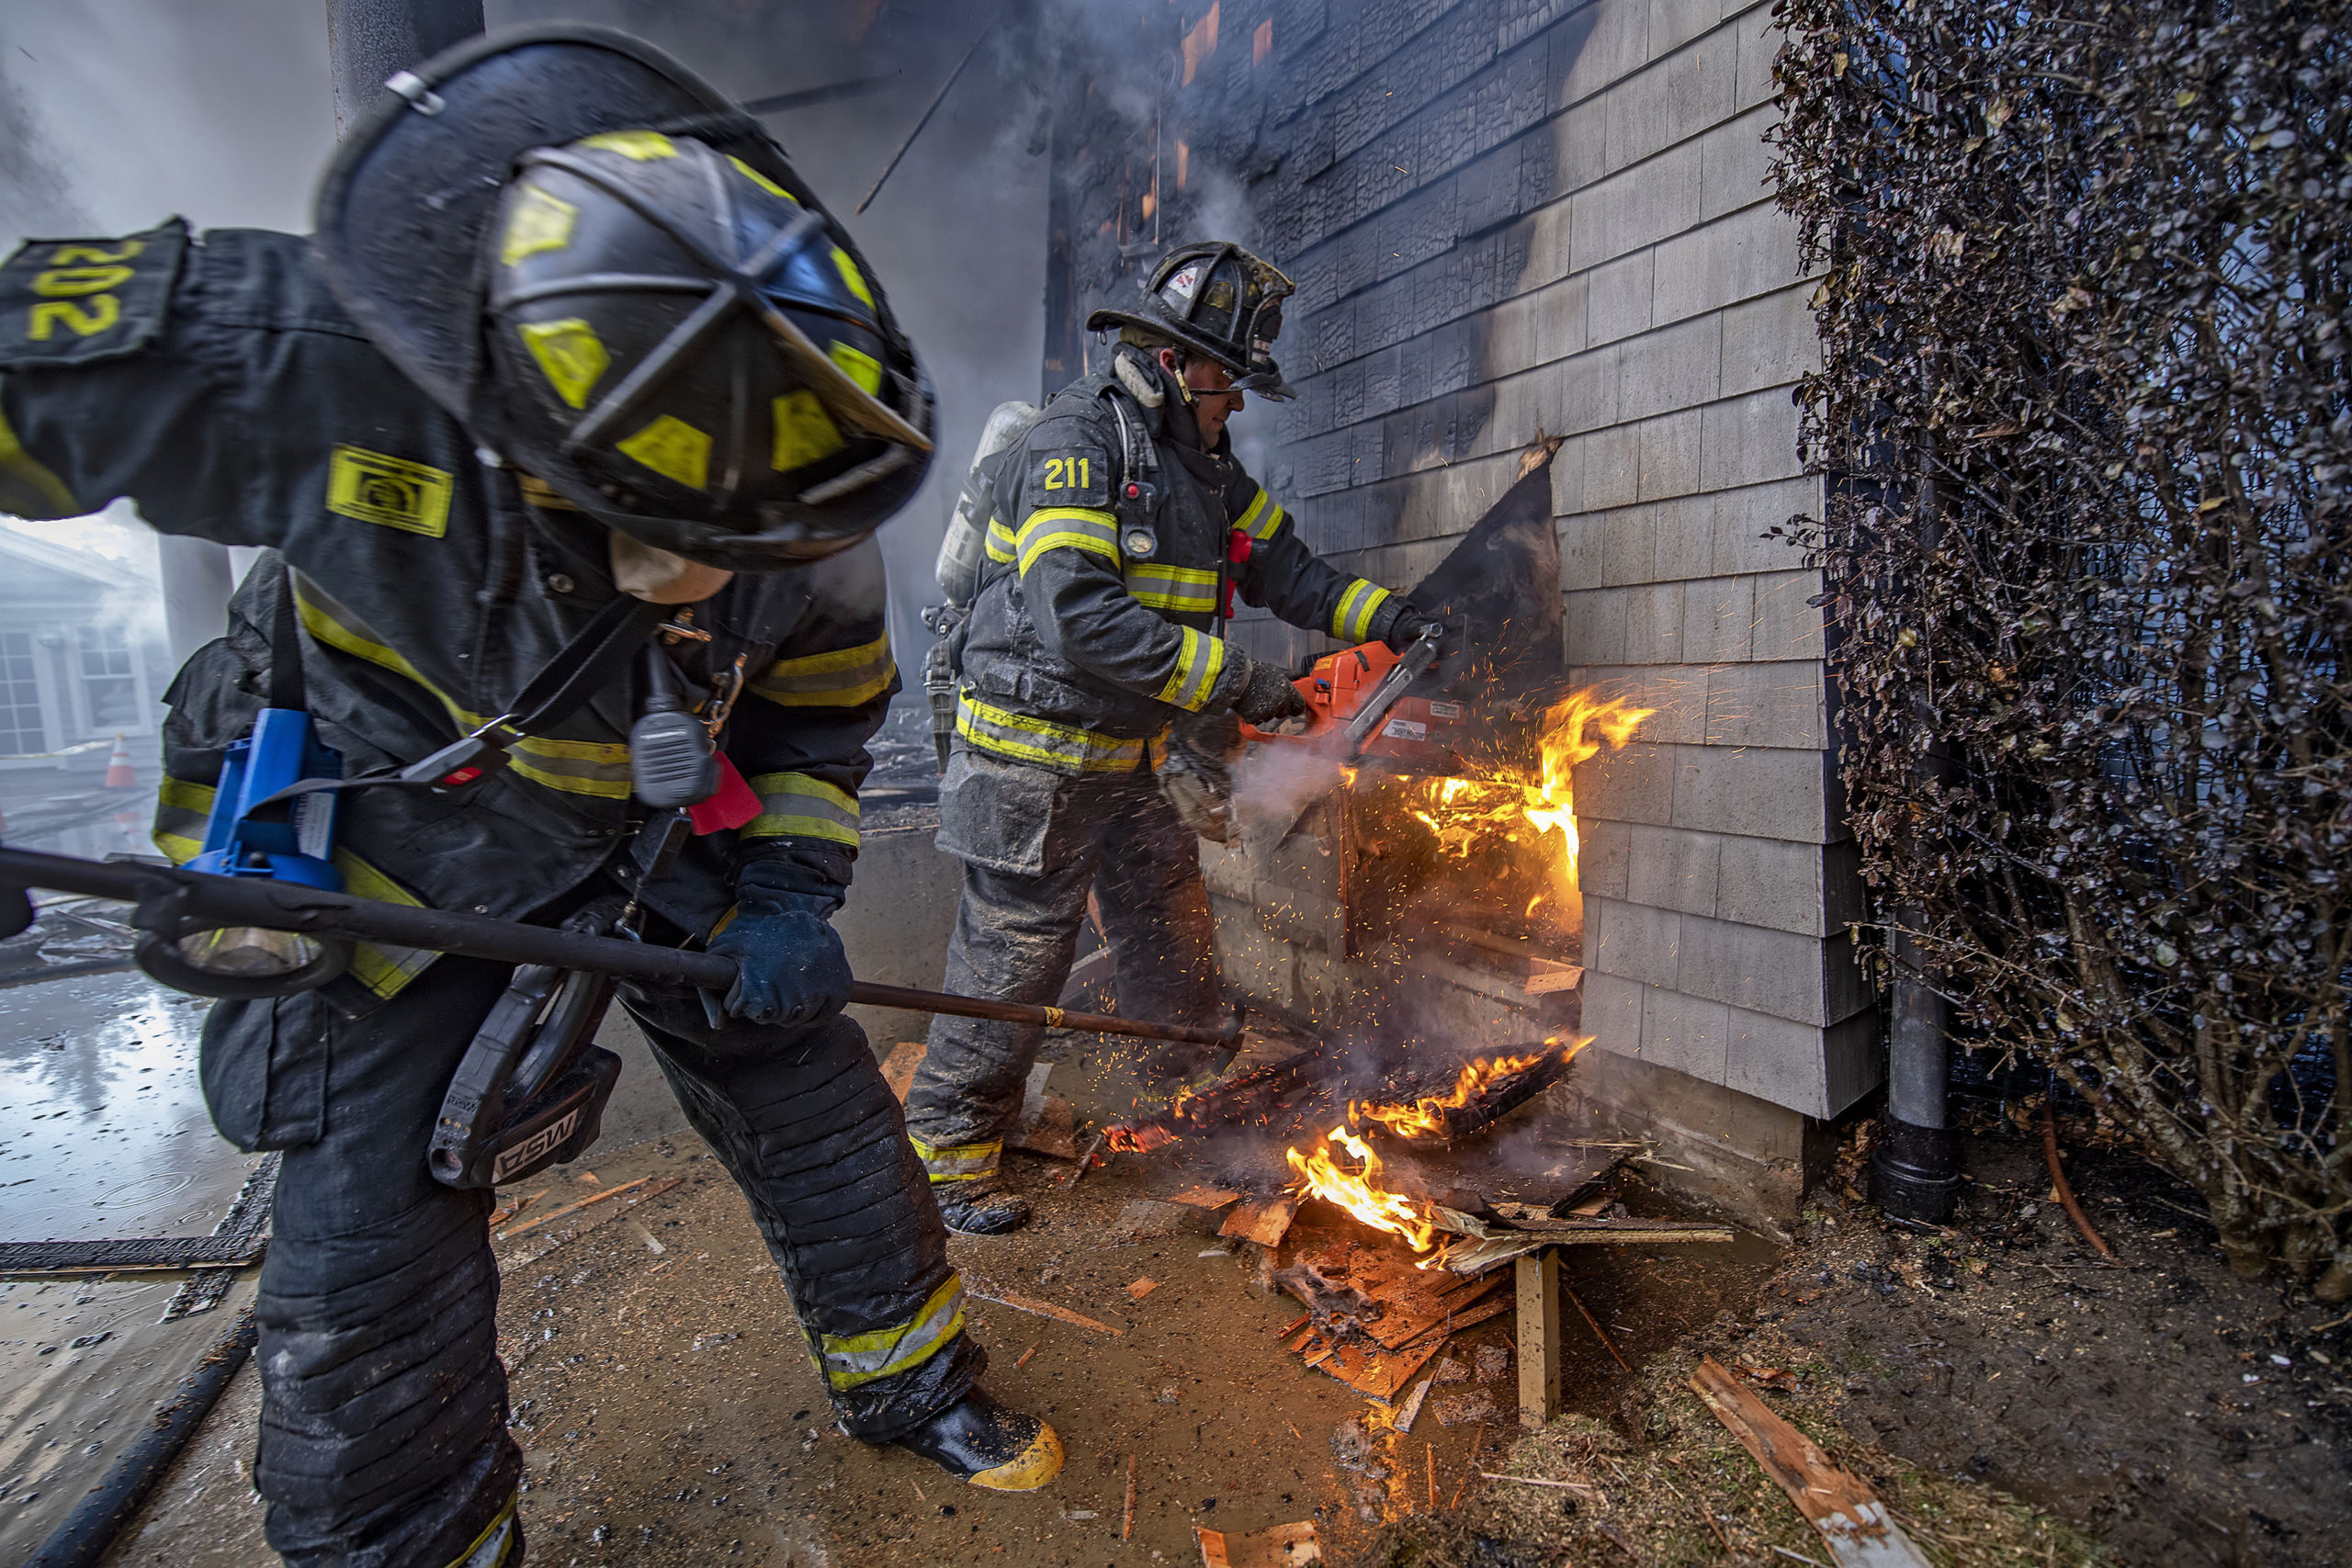 The Bridgehampton Fire Department, with mutual aid from numerous other departments and EMS agencies including the Southampton, Hampton Bays, North Sea, Sag Harbor, East Hampton and Springs Fire Departments, fought a difficult working fire in a 8,000 square-foot residence at9 West Pond Drive in Water Mill on Thursday.     MICHAEL HELLER